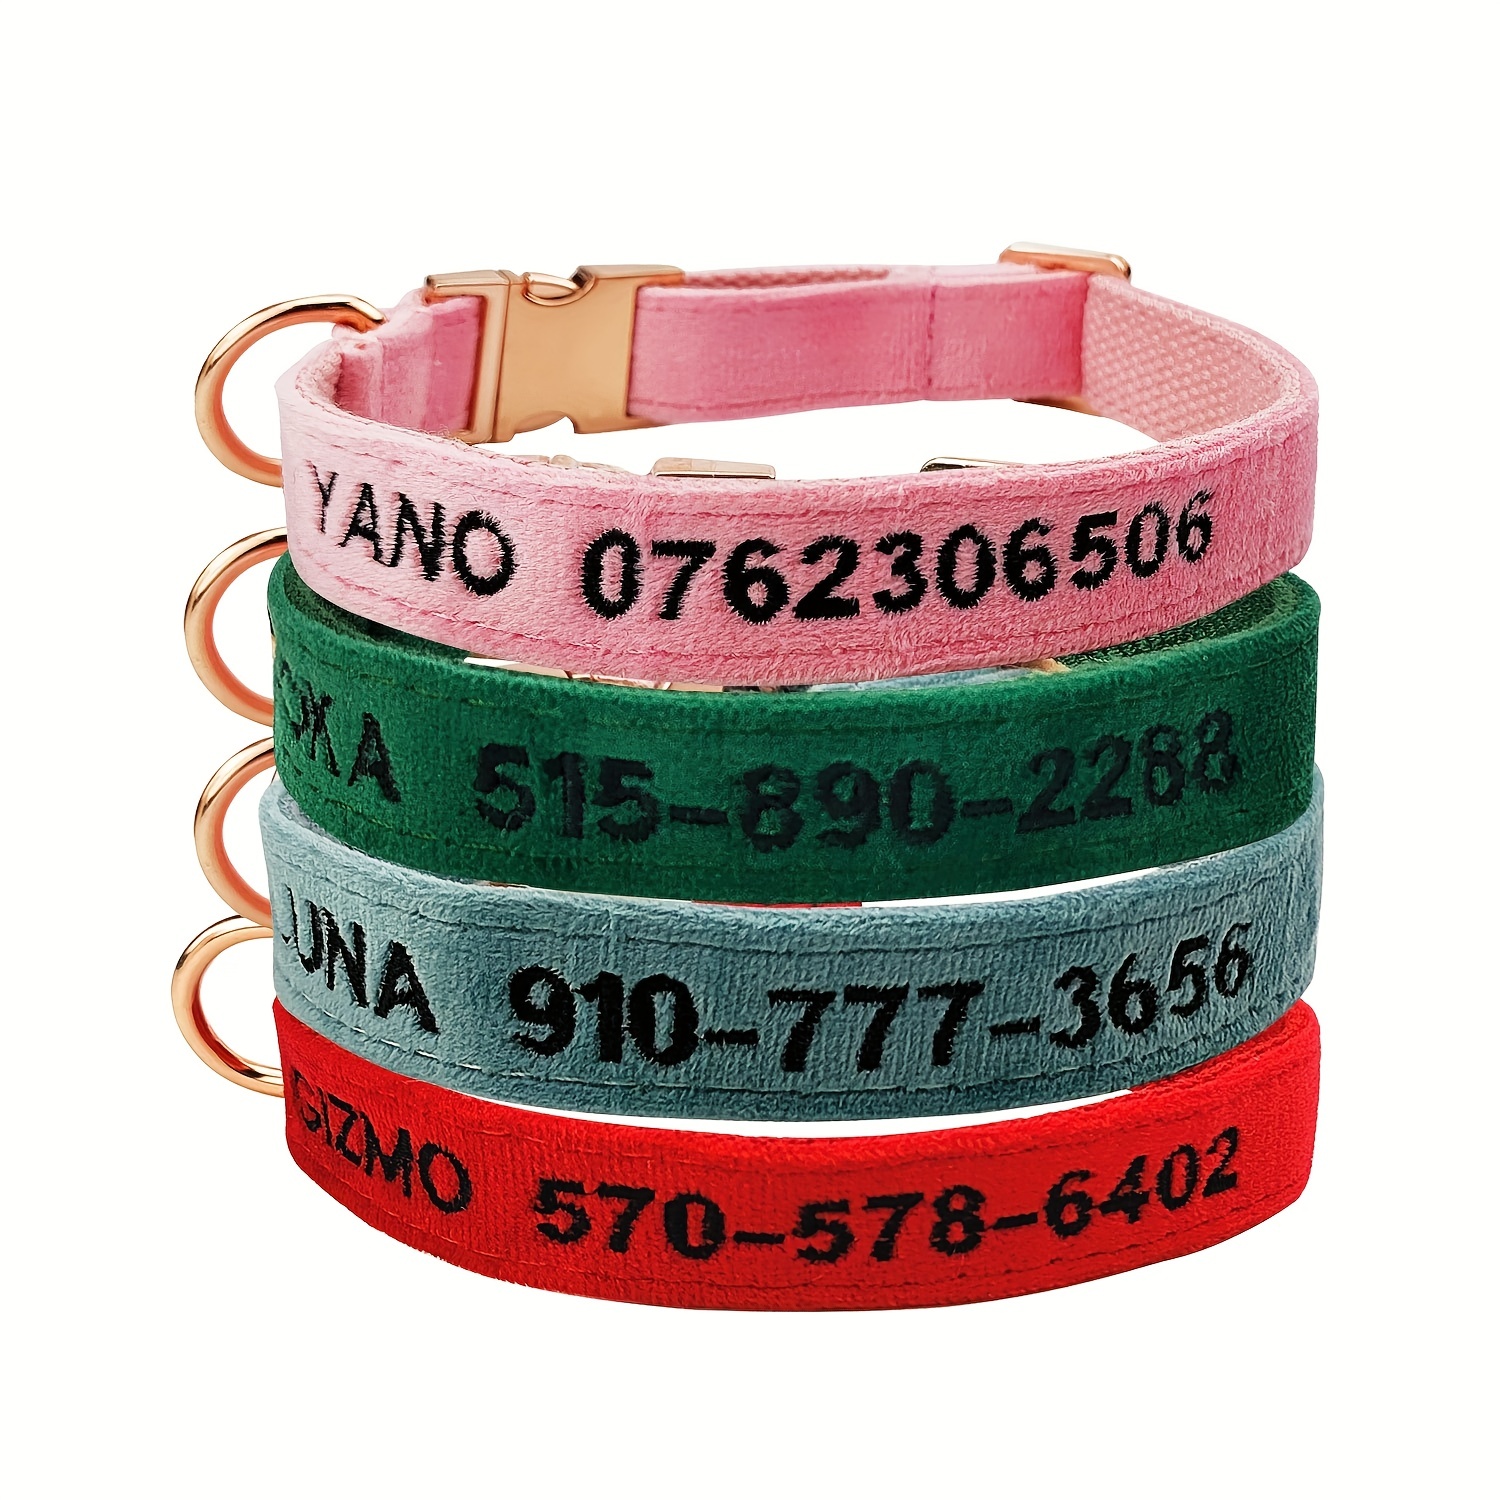 Personalized Dog Collar, Custom Embroidered Pet Name and Phone Number 4  Adjustable Sizes X-Small Small Medium Large Quick Release Buckle and D-Ring